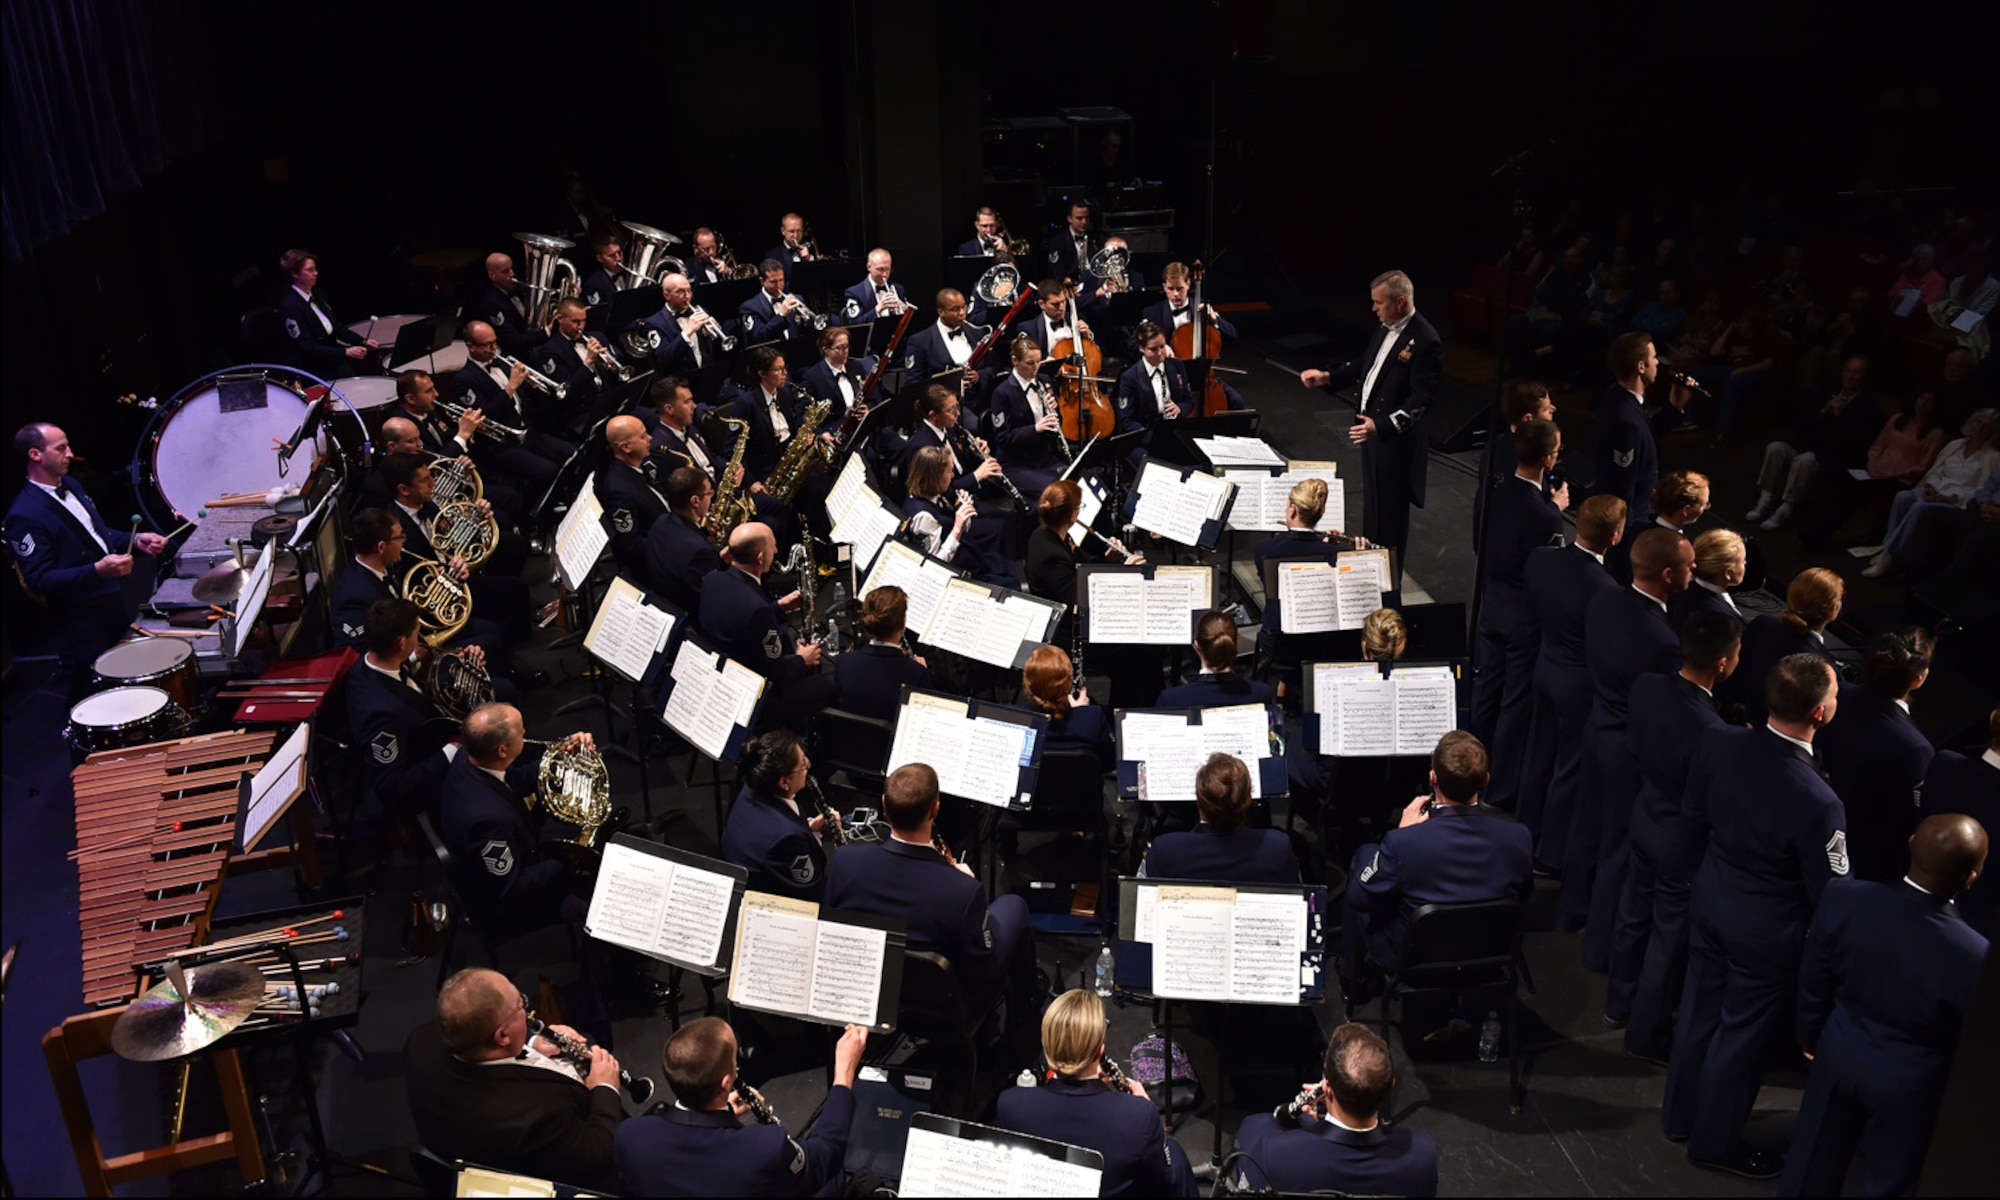 The U.S. Air Force Singing Sergeants and Concert Band perform at University Louisiana-Monroe, in Monroe, La., April 11, 2016. The bands performed across five states during a 12 day spring tour. (U.S. Air Force photo by Senior Airman Dylan Nuckolls/Released)